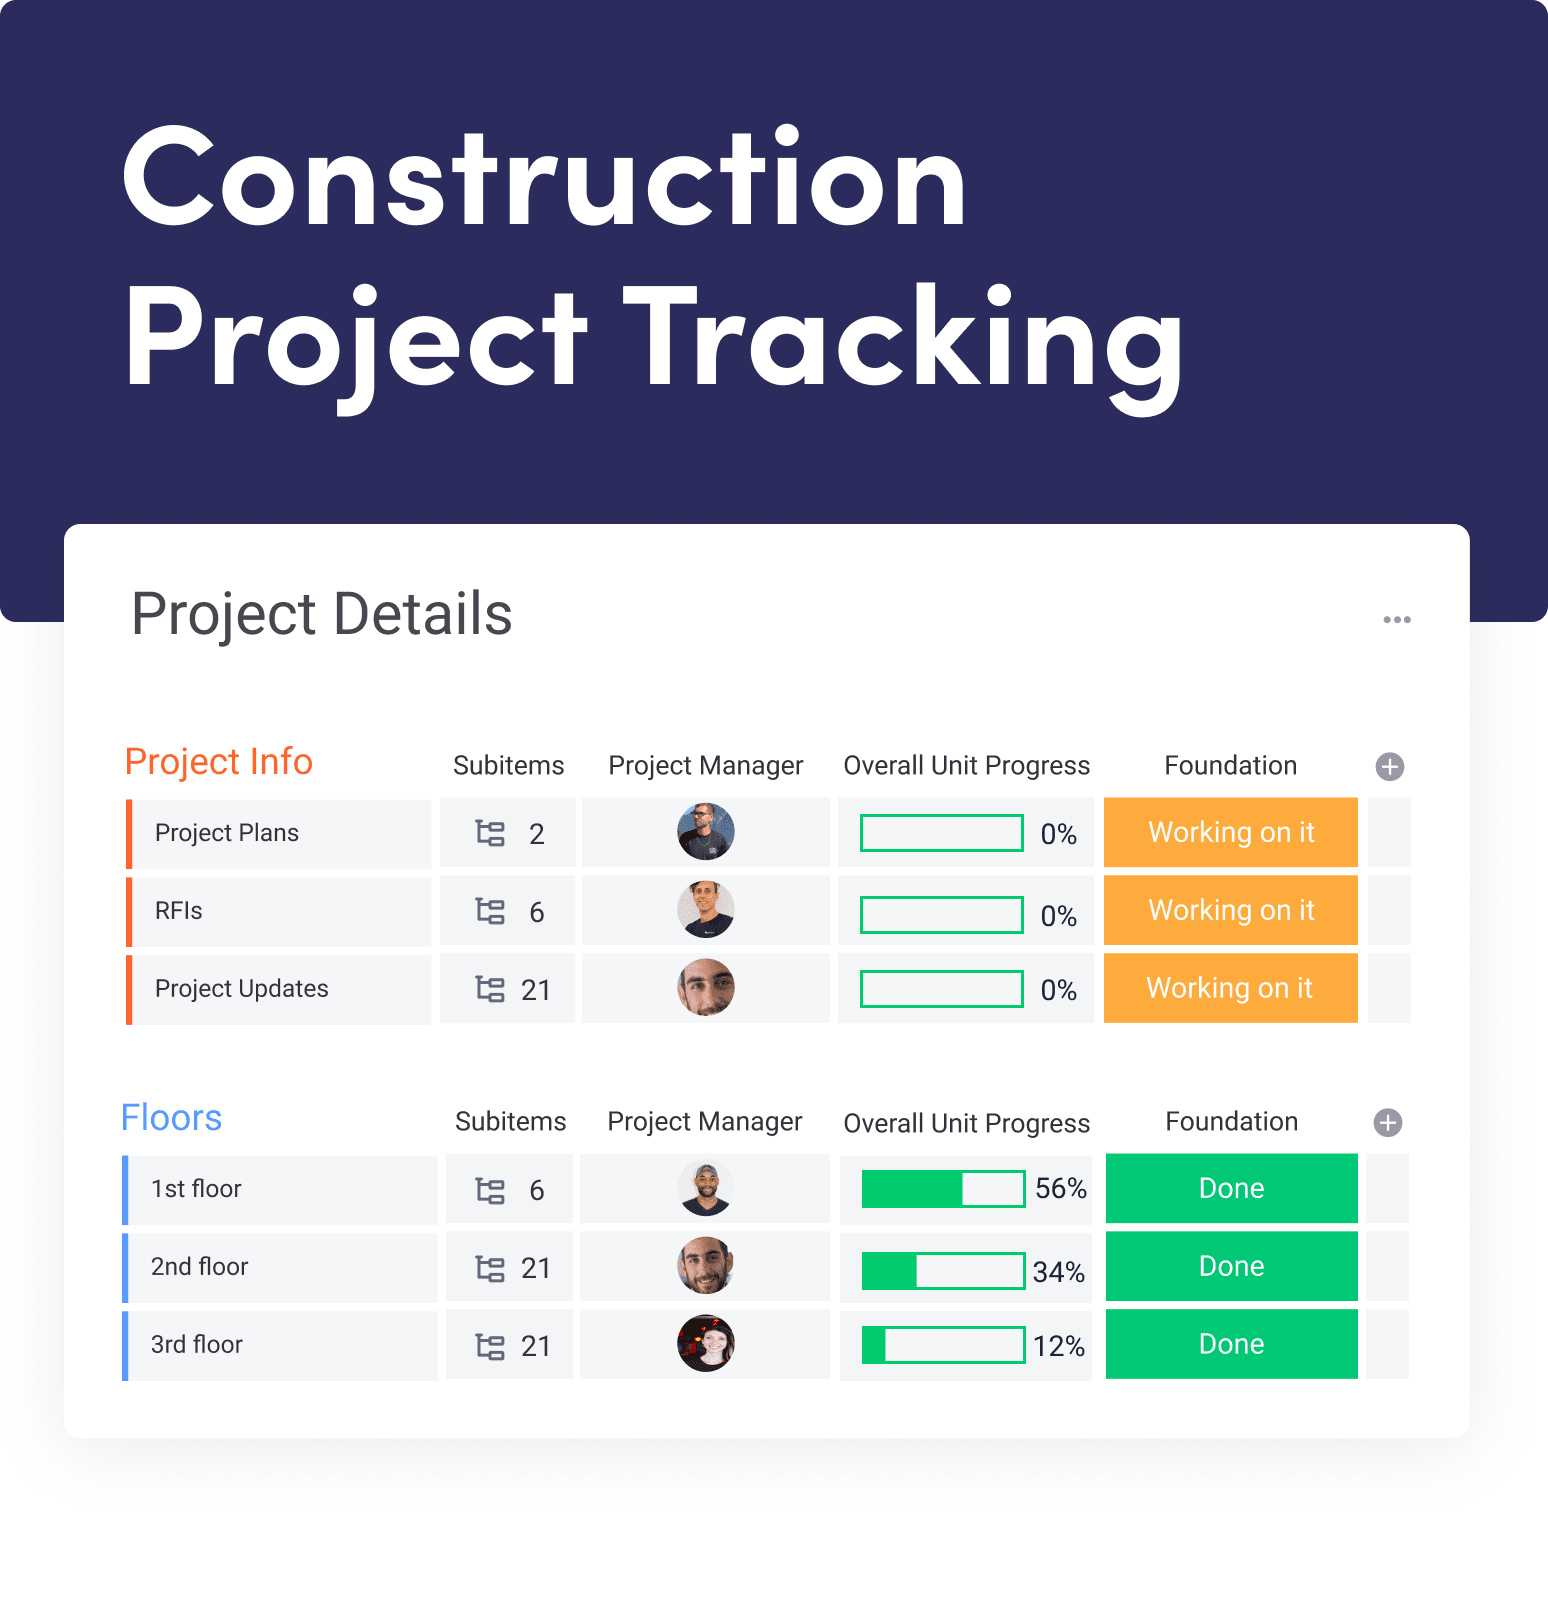 Constructionprojecttracking